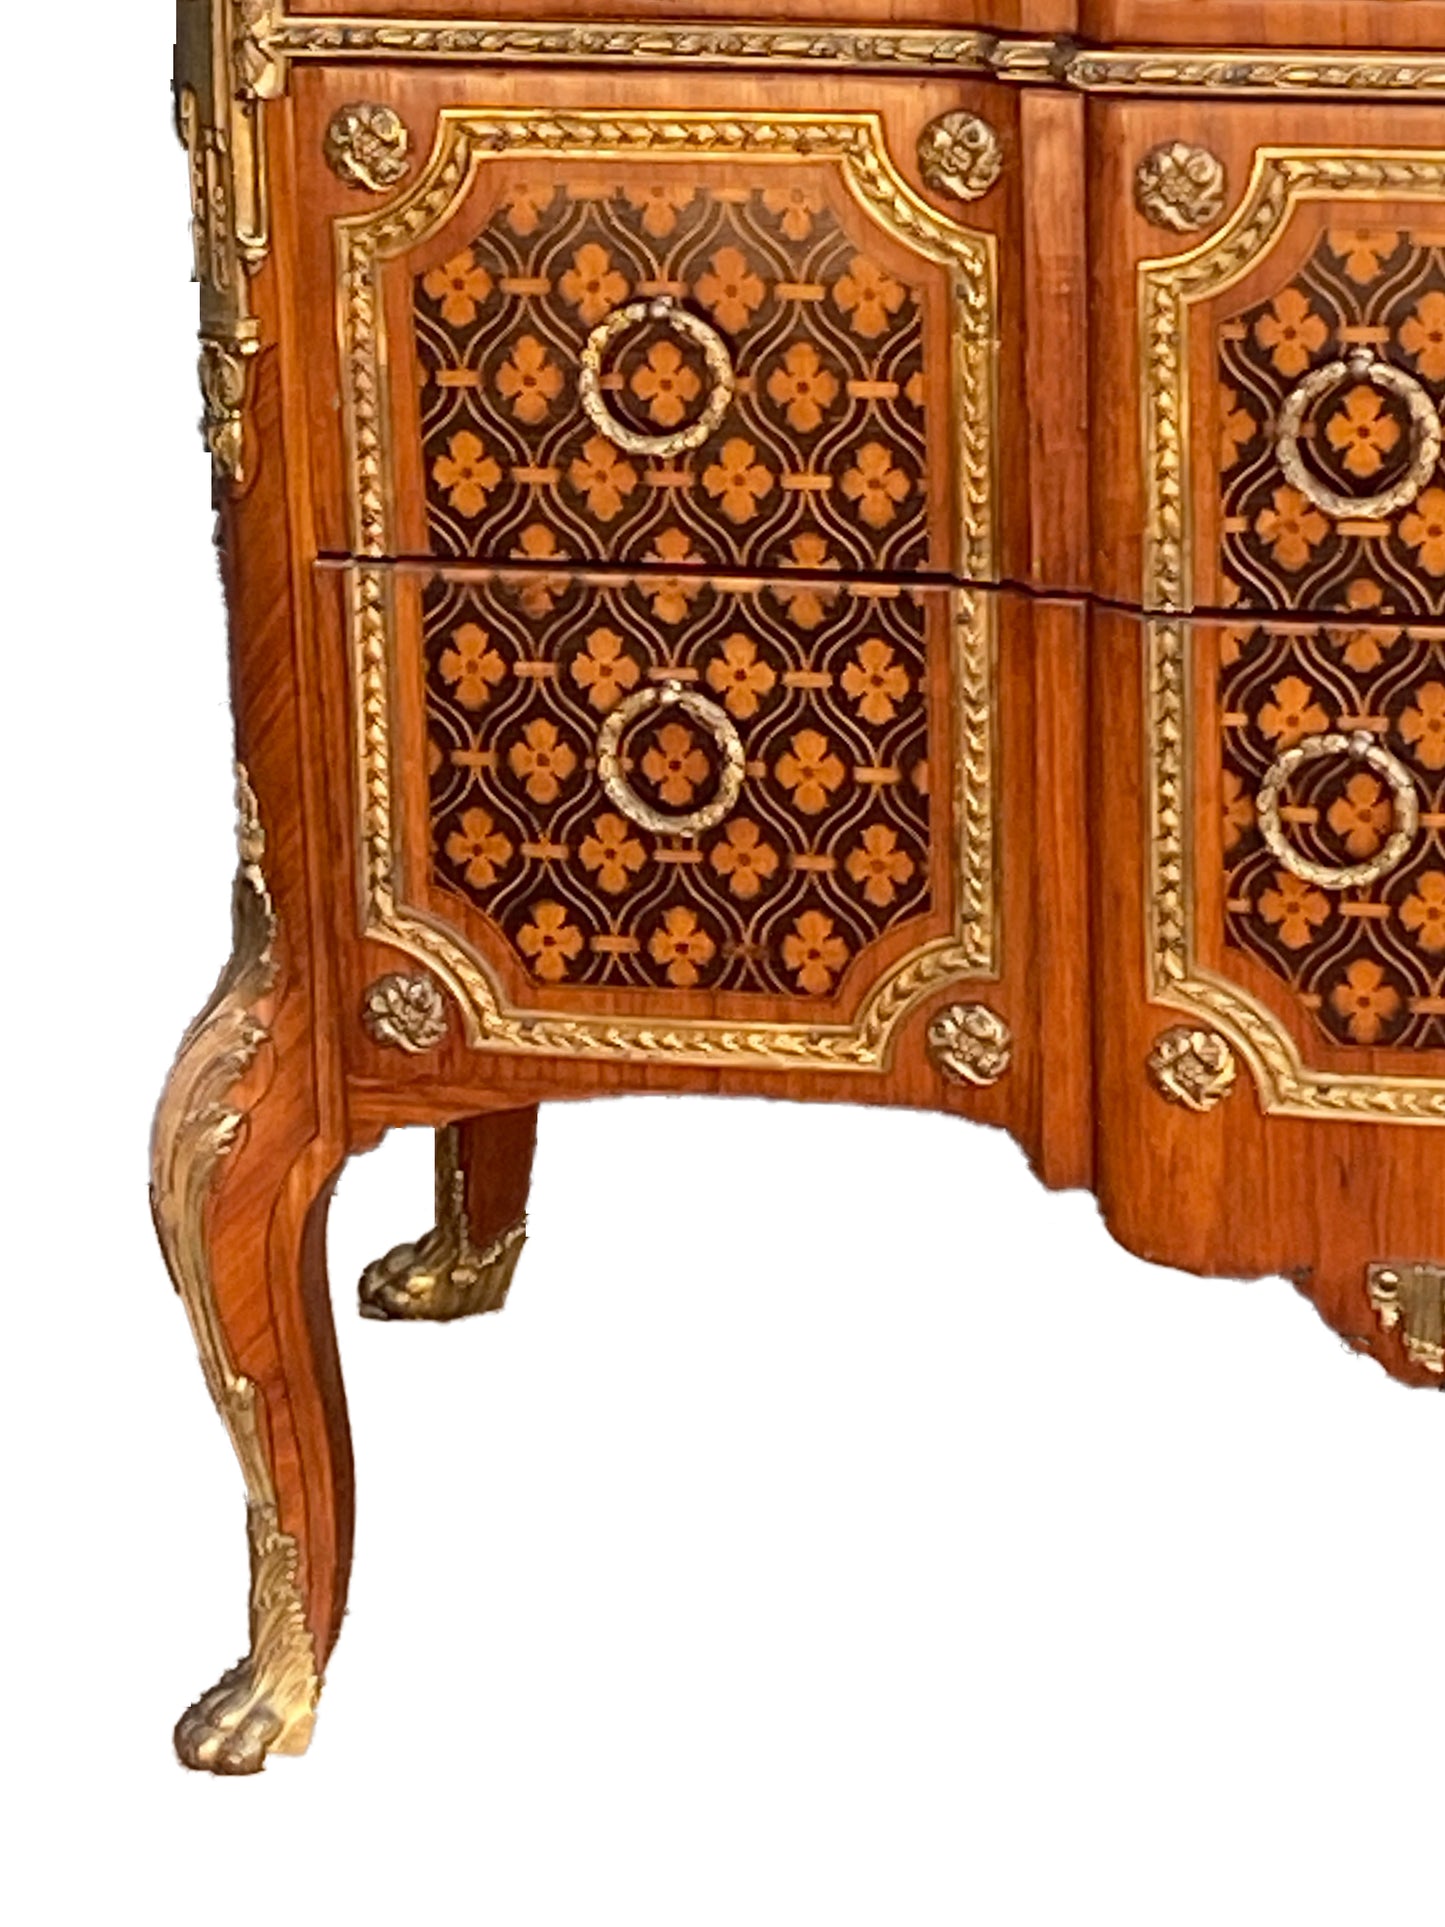 Fine French Bronze Mounted Inlaid Marble Top Commode